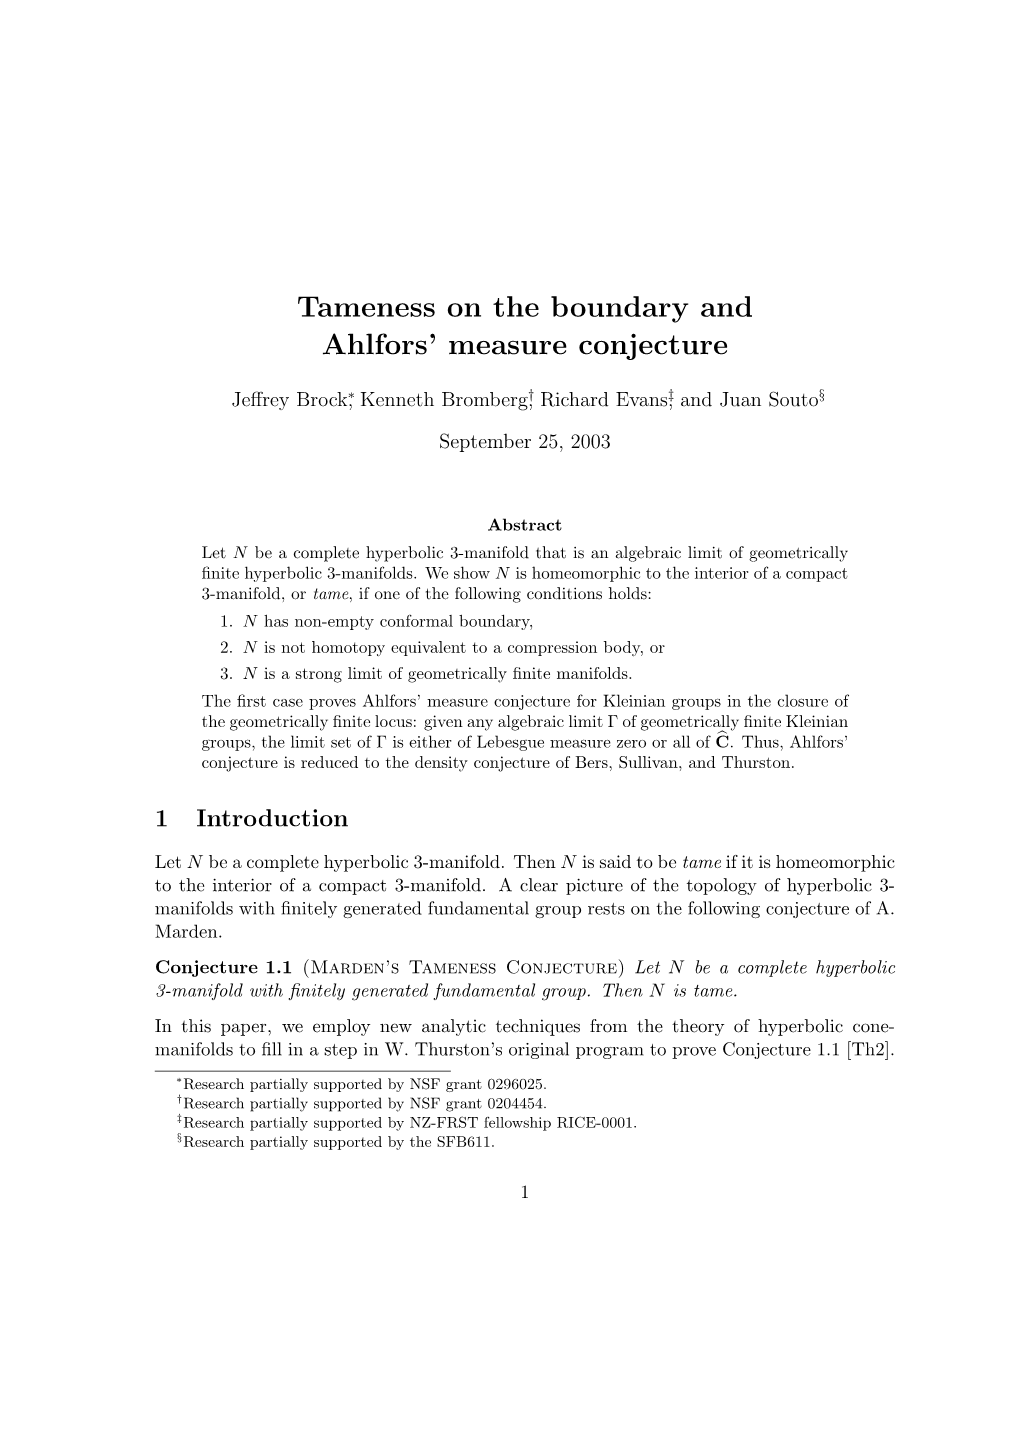 Tameness on the Boundary and Ahlfors' Measure Conjecture